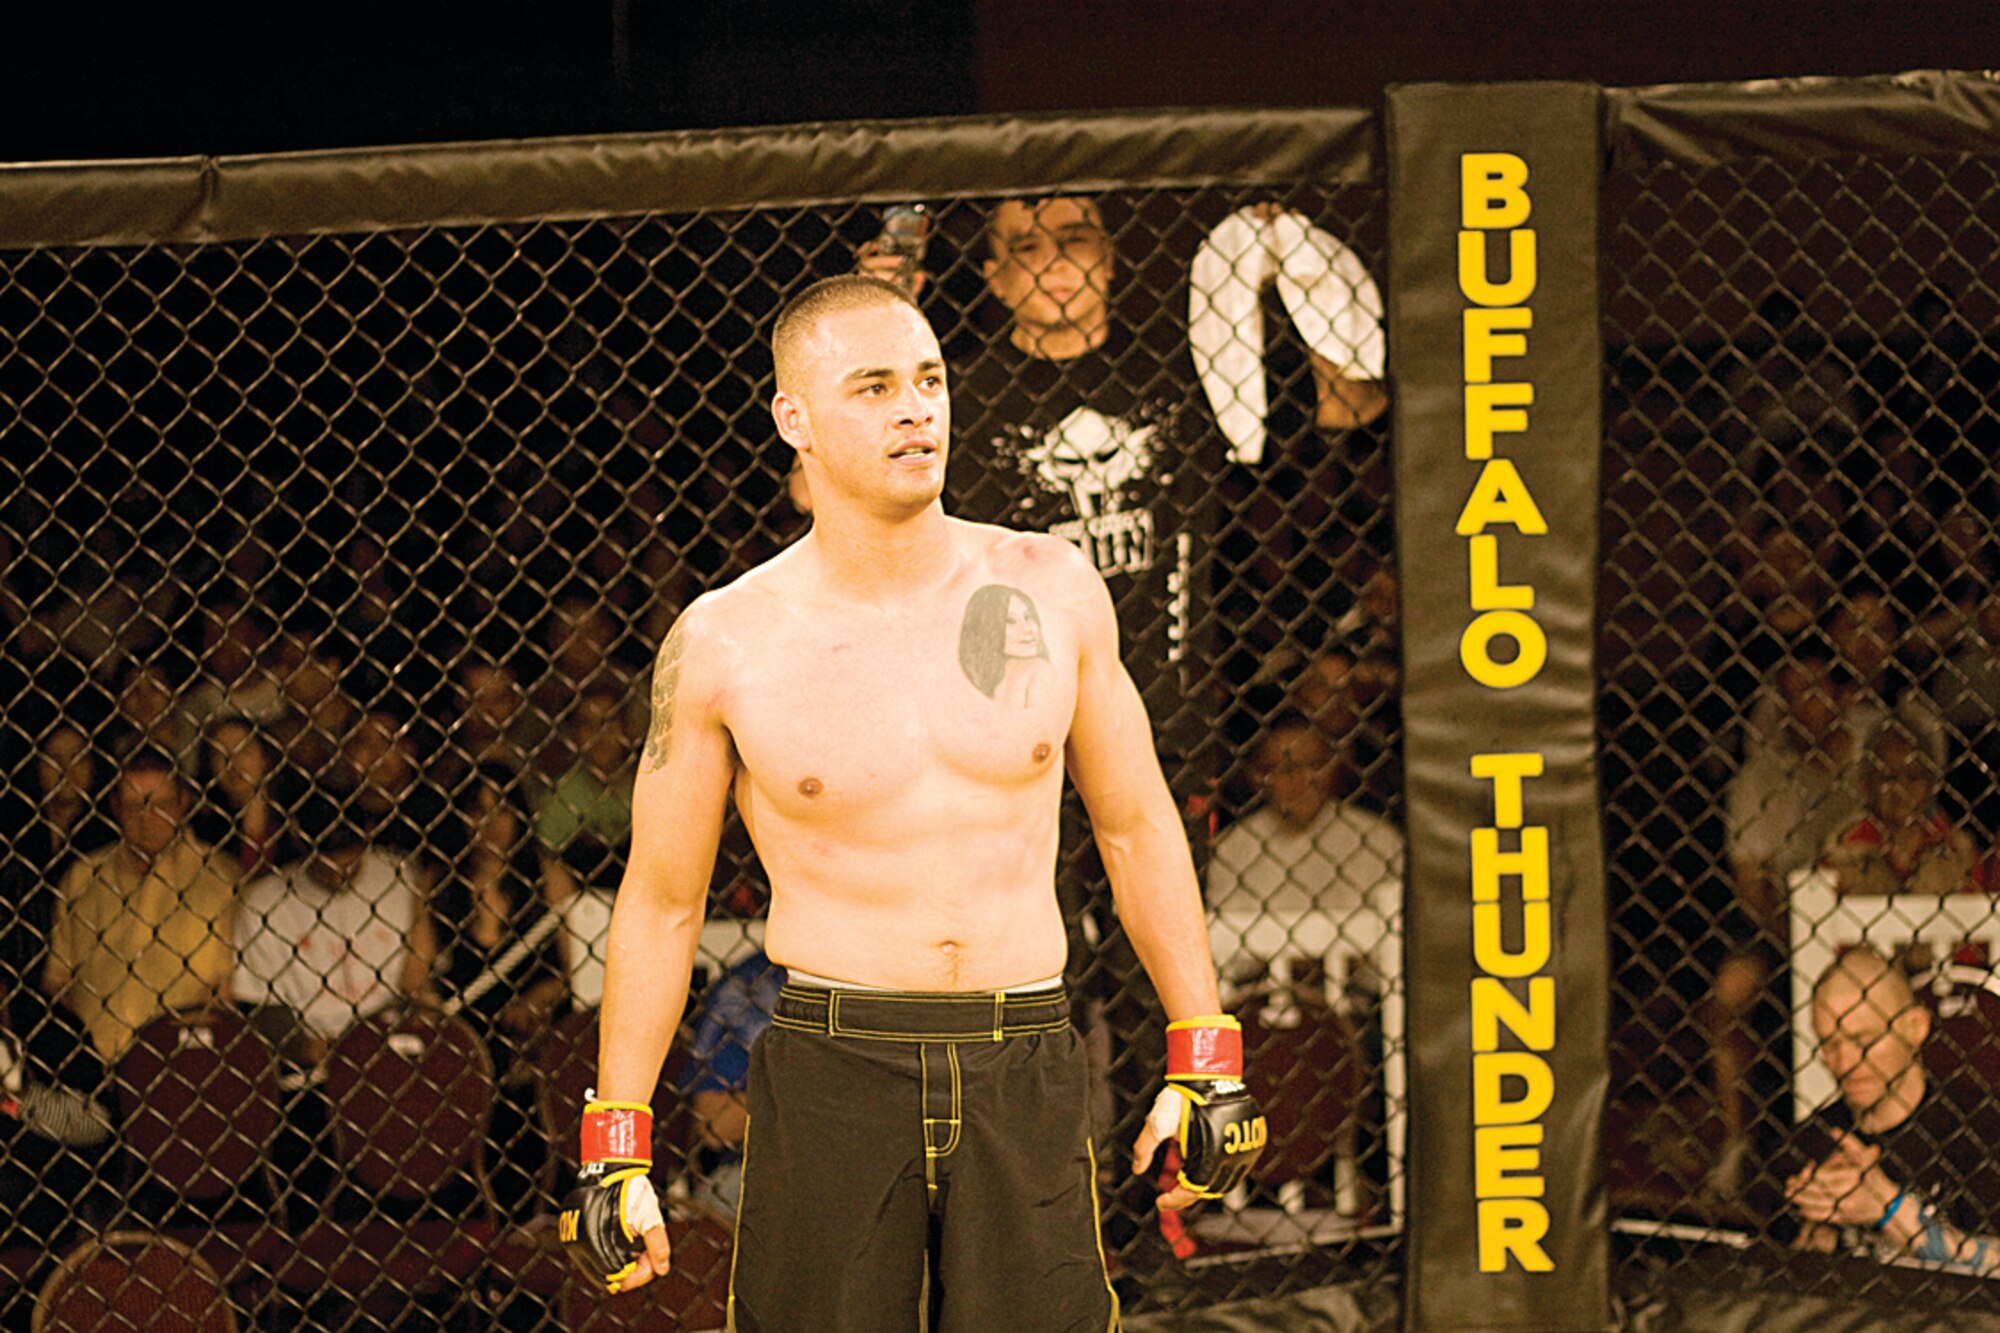 David Perez is a mixed martial artist who won two “King of the Cage” bouts June 4 at Buffalo Thunder Casino Resort in Santa Fe.  Courtesy Photo by Ryan Garcia